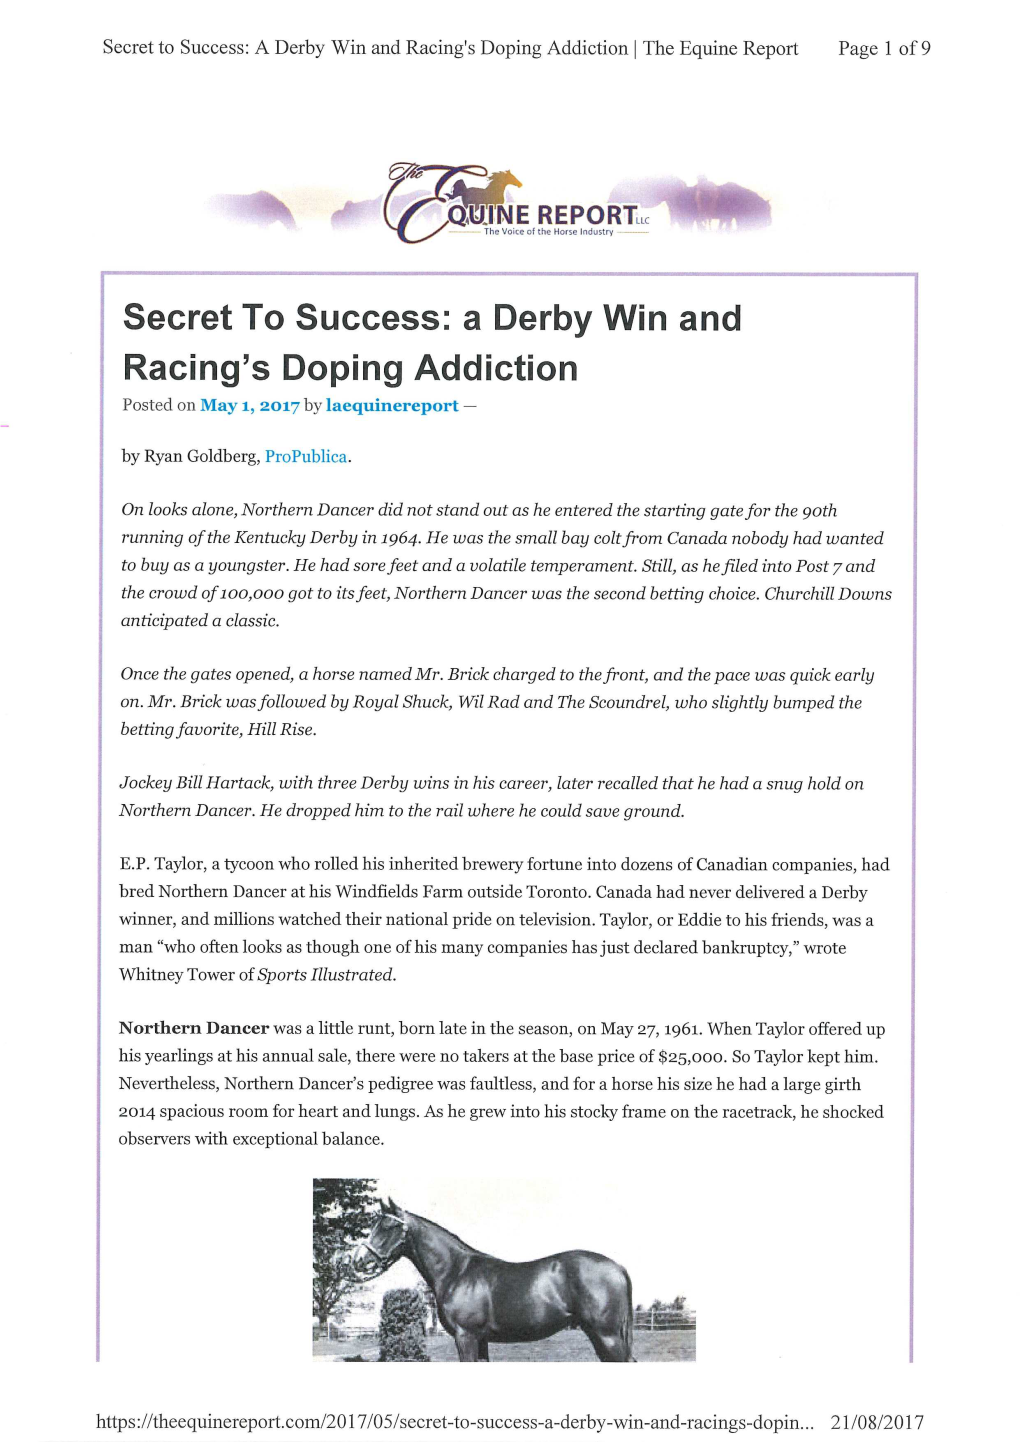 Secret to Success: a Derby Win and Racing's Doping Addiction I the Equine Report Page 1 of 9